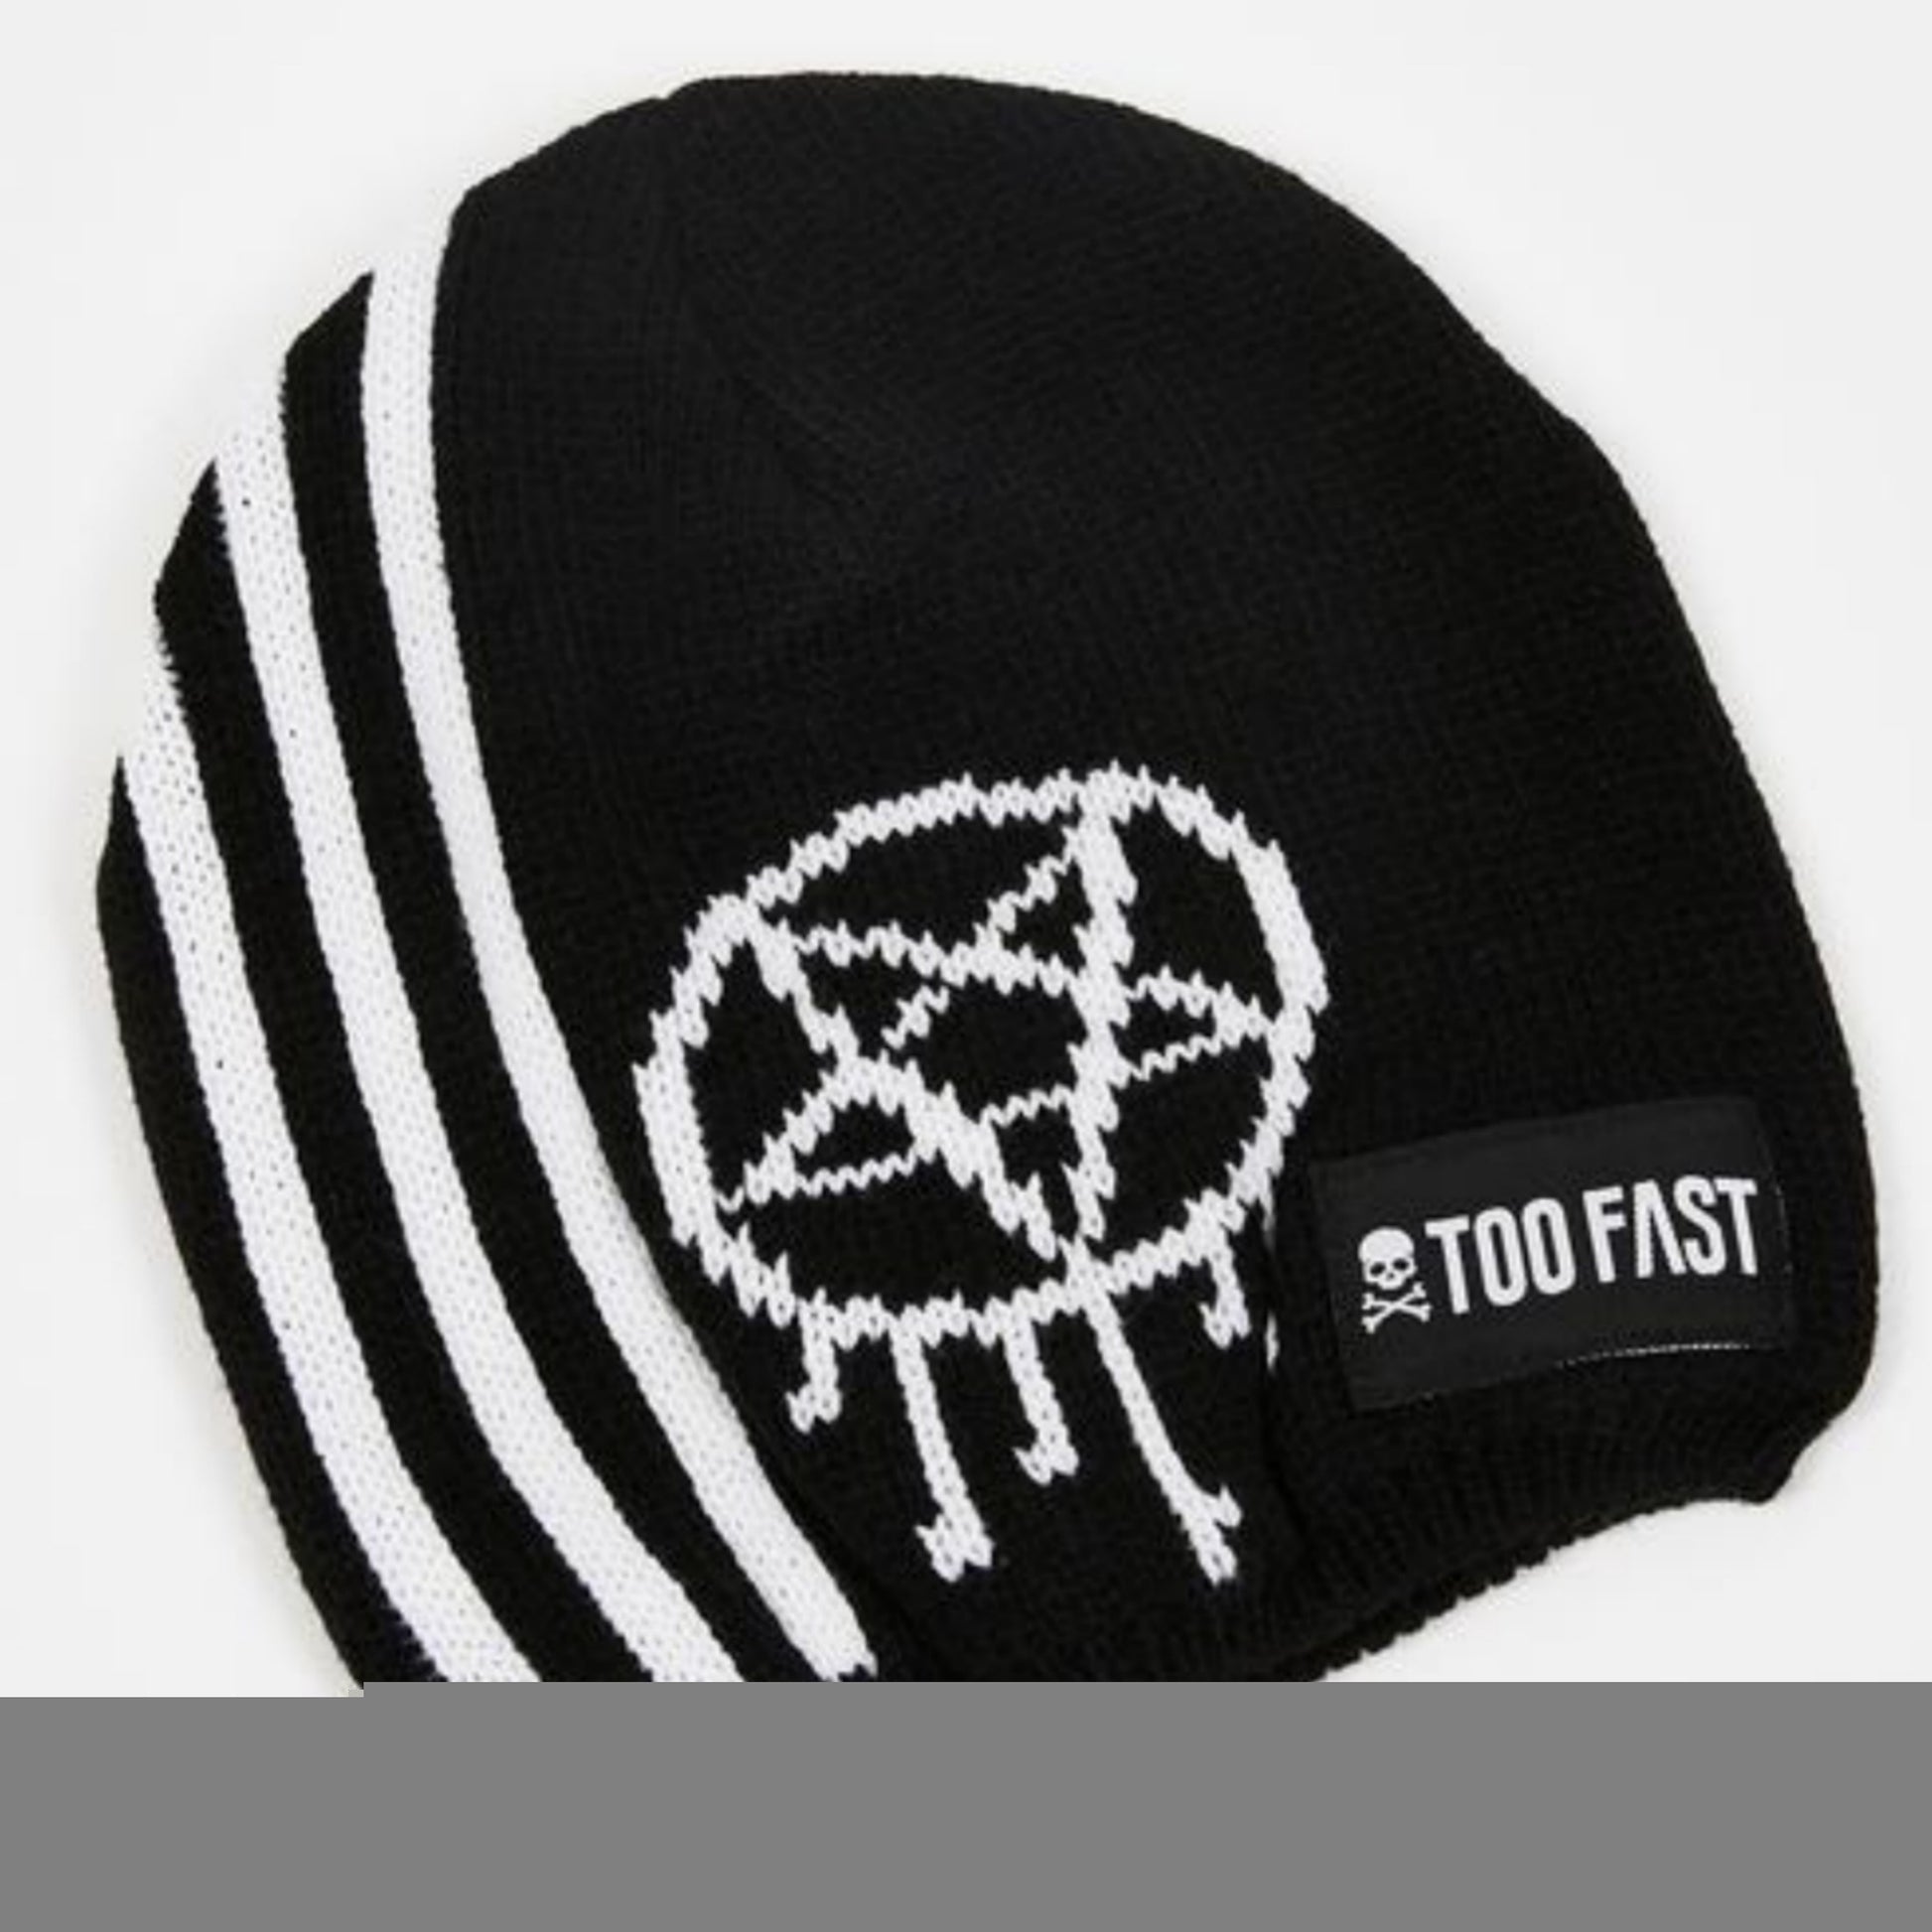 Stars and Stripes Beanie | Black Knit White Pentagram Graphic - Too Fast - Beanies